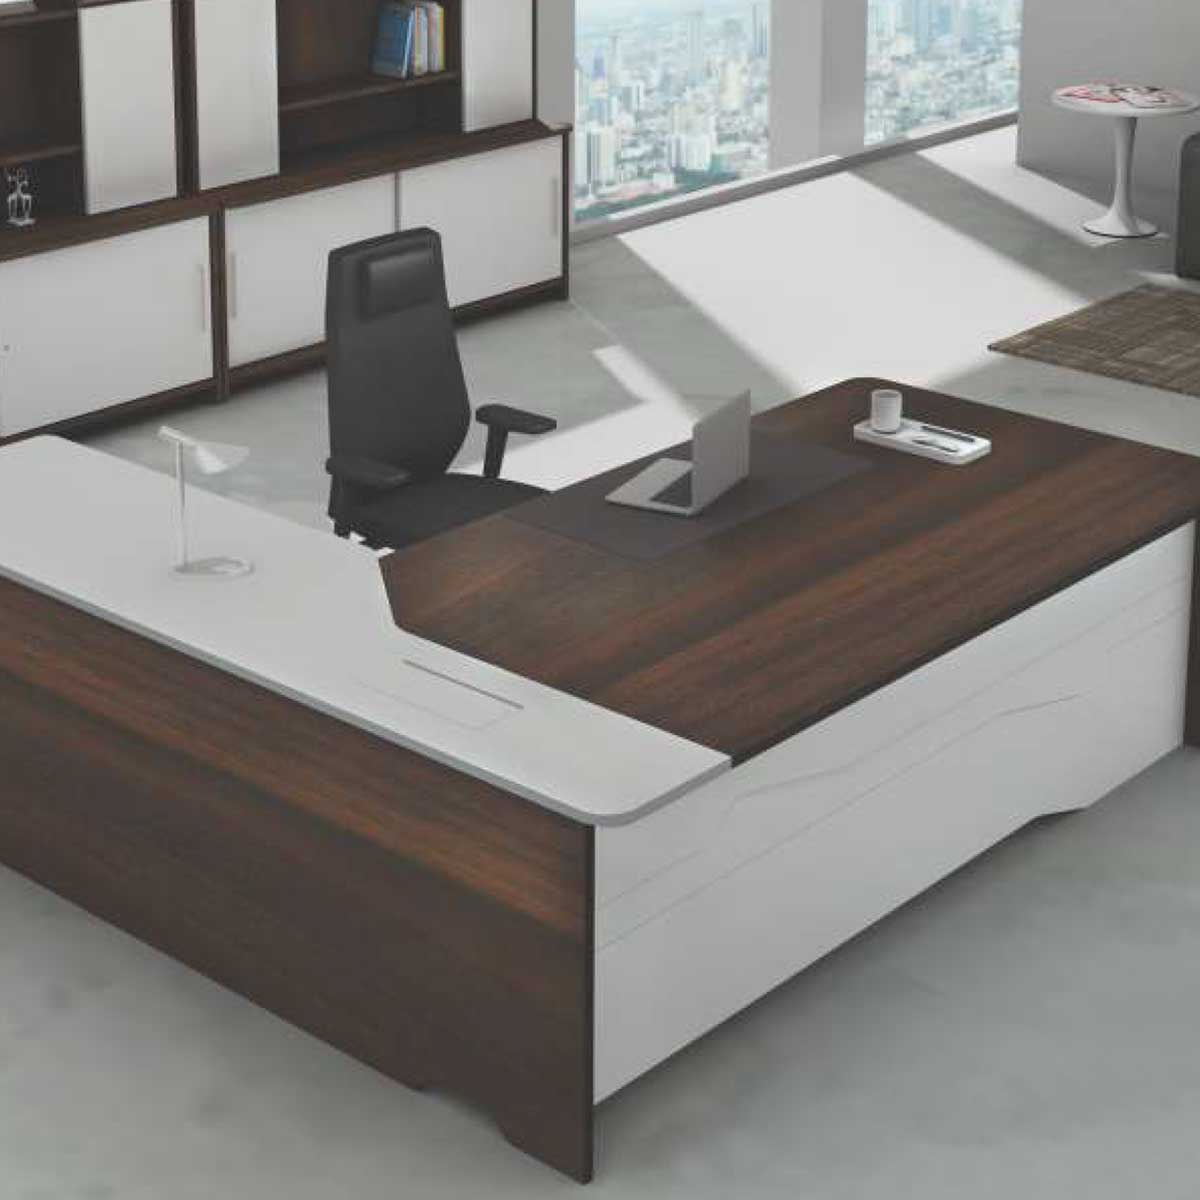 Manager Table Manufacturers, Suppliers in Anand Vihar